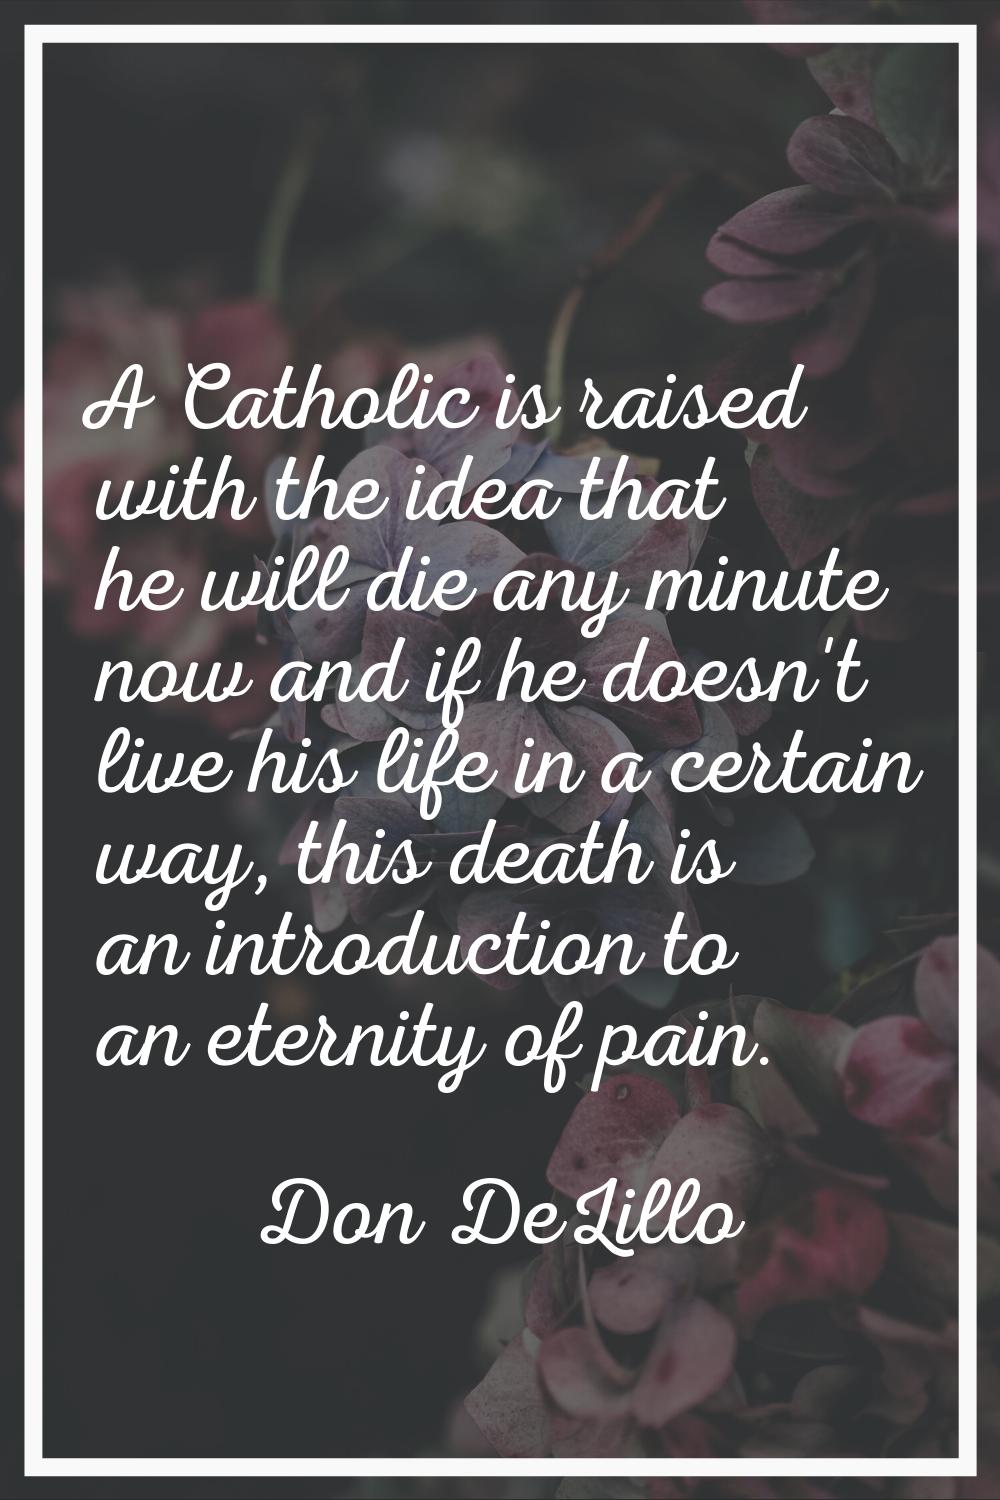 A Catholic is raised with the idea that he will die any minute now and if he doesn't live his life 